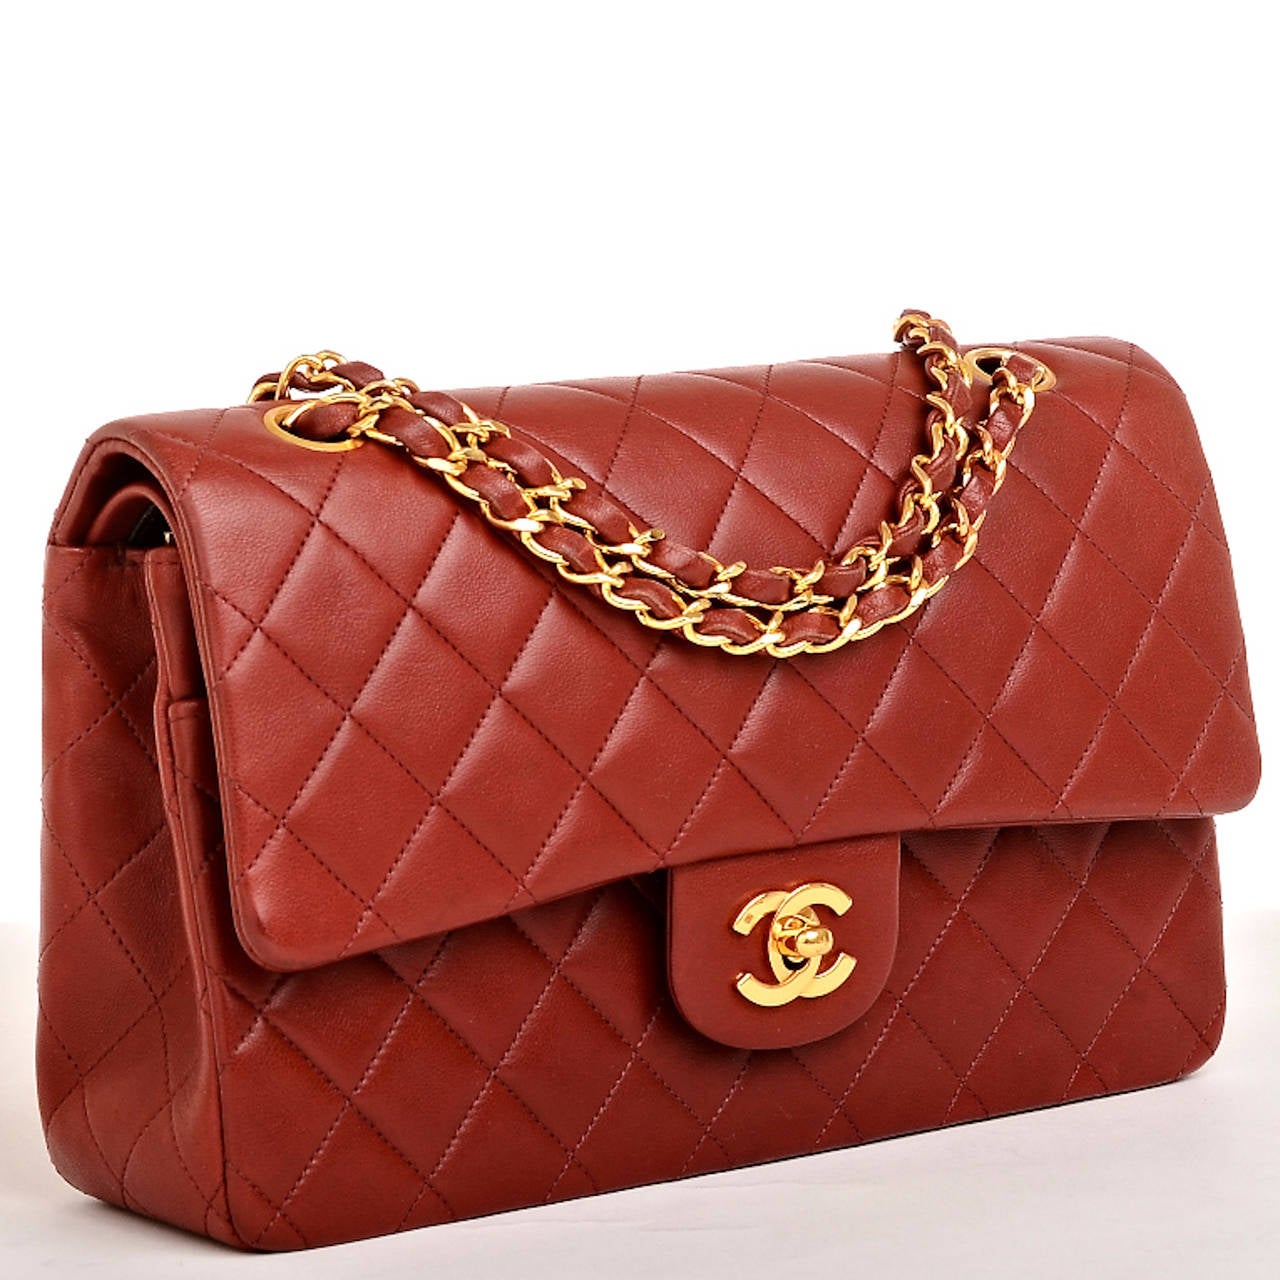 Chanel vintage dark red Large Classic double flap bag of quilted lambskin leather with gold tone hardware.

This beautiful vintage Chanel dark red Large Classic double flap bag in rare mint condition proves the timelessness of the Chanel Classic.